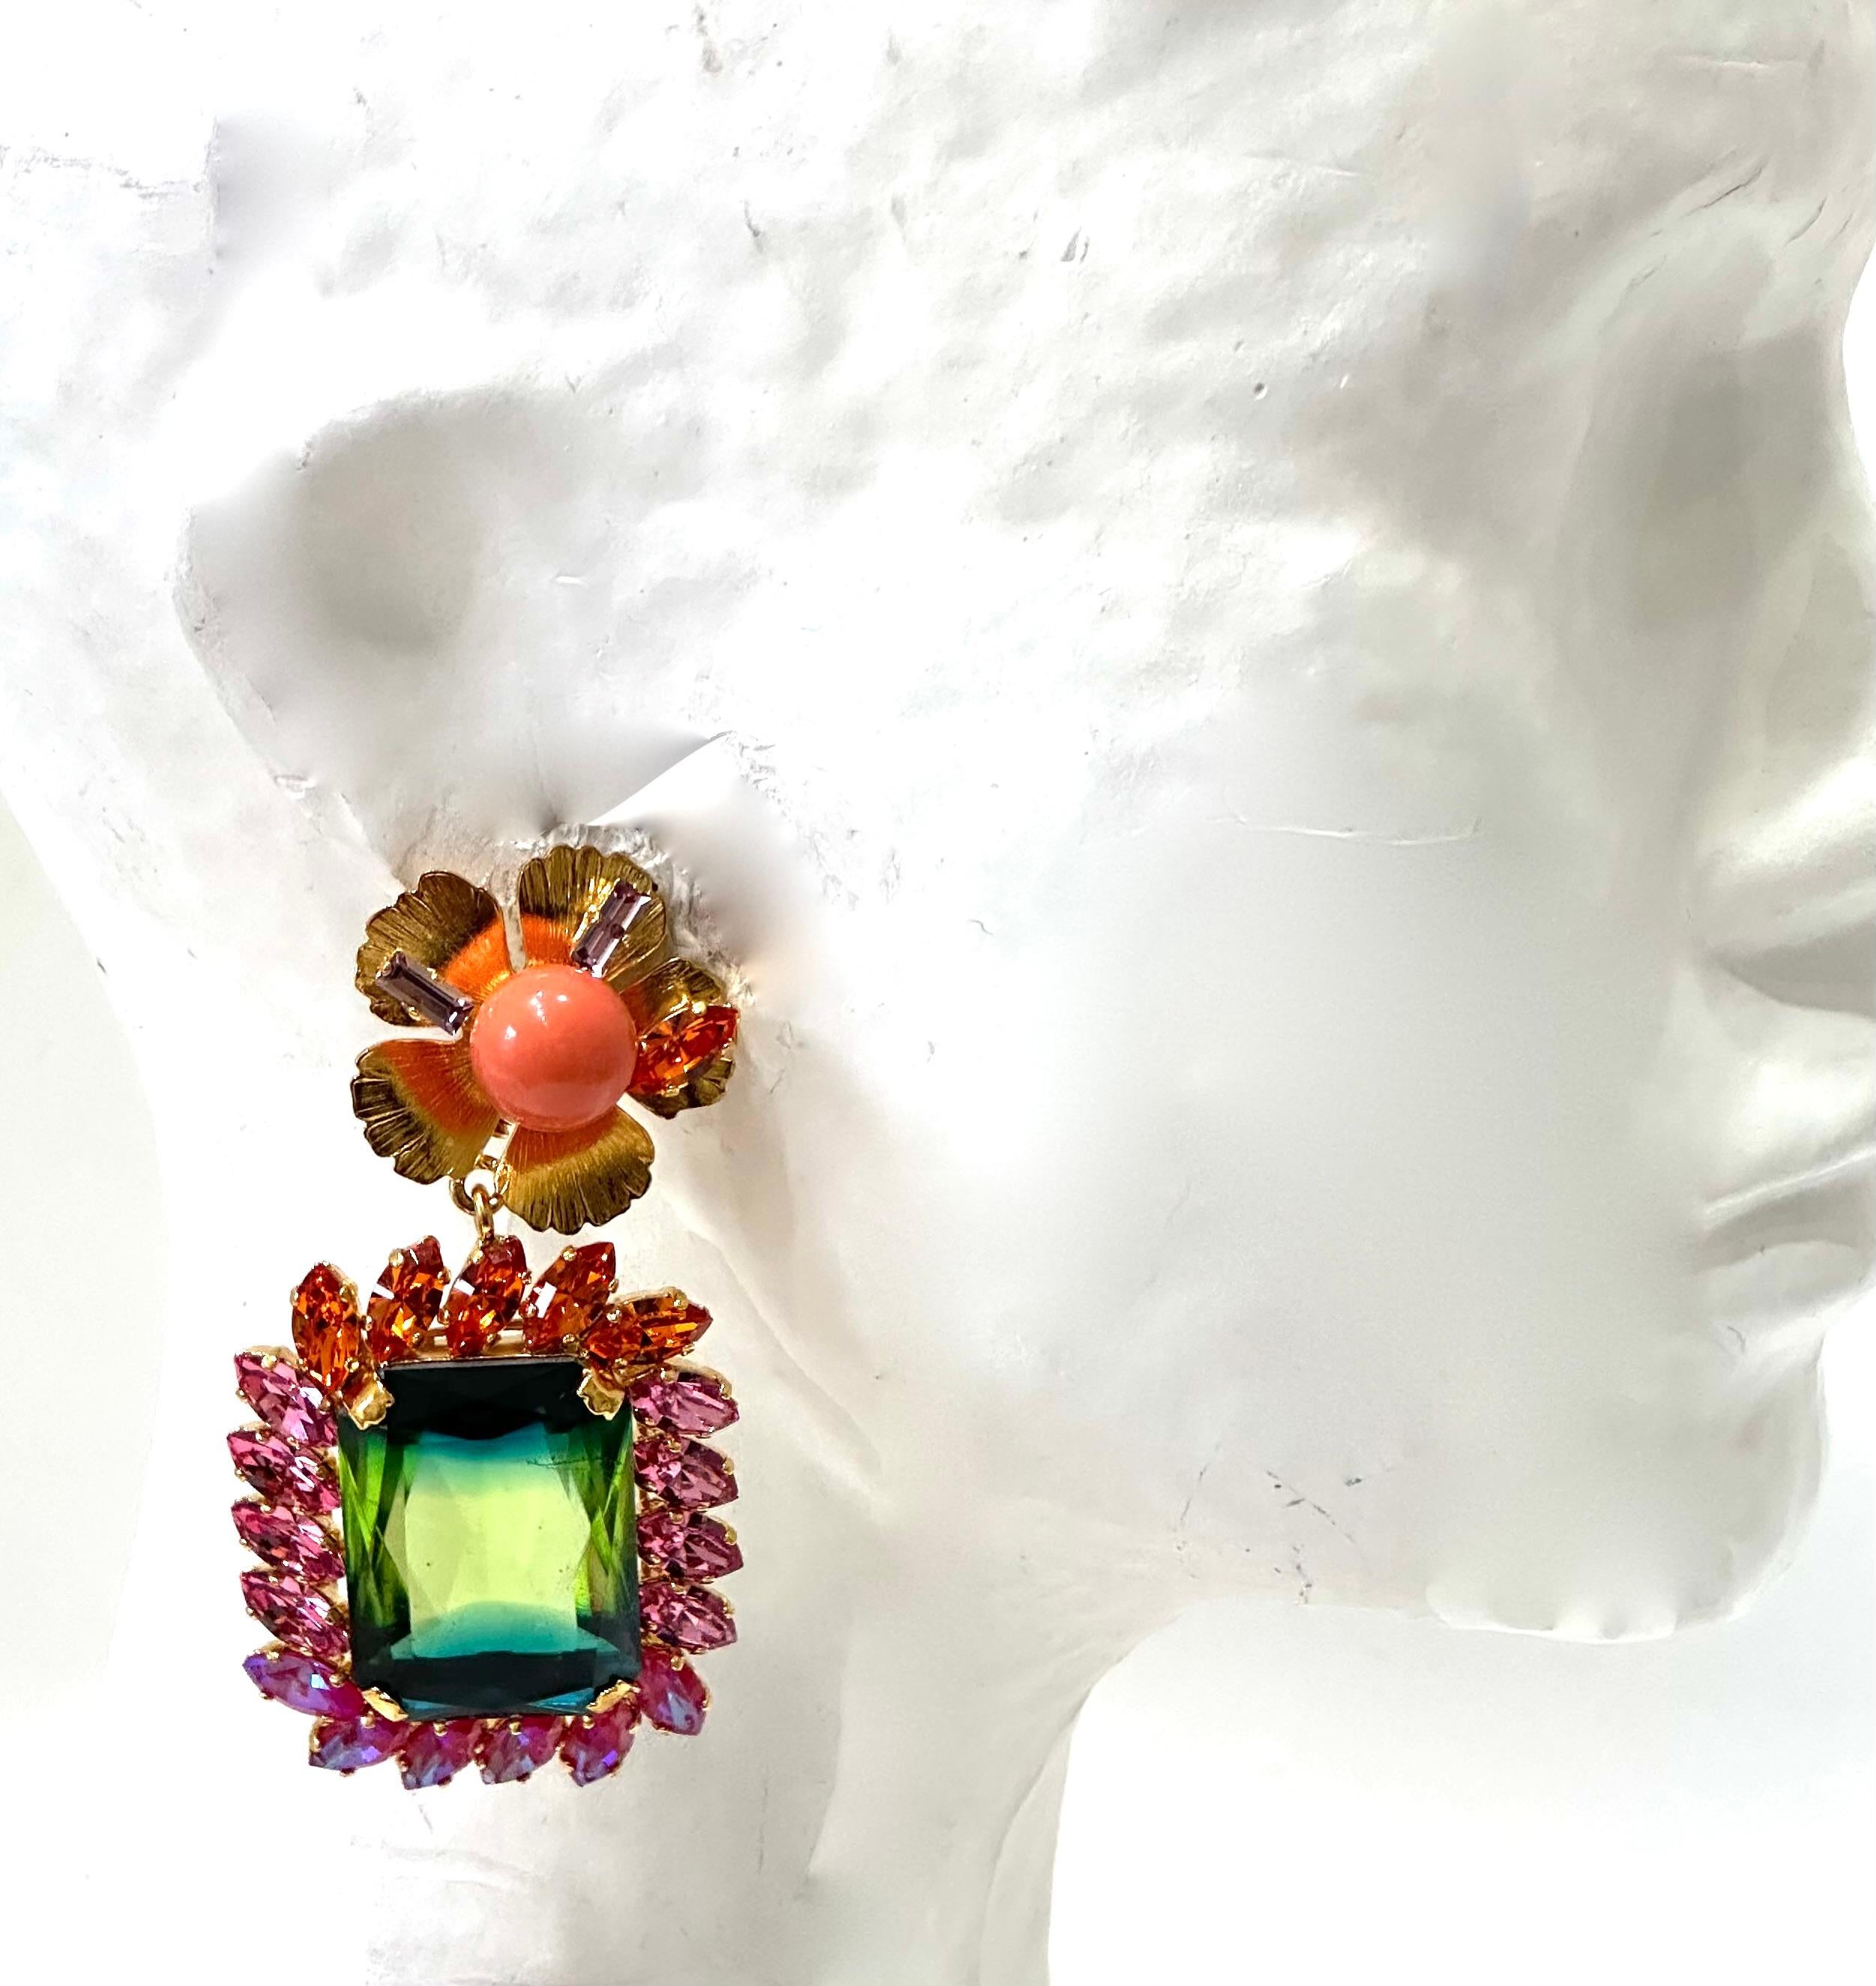 One of a kind made exclusively for Isabelle K Jewelry.
24carat gilded brass, Swarovski Crystal in exquisite colors . Coral glass pearl.
A show stopper!
Philippe Ferrandis was just chosen by the iconic French perfume company Guerlain for a fabulous